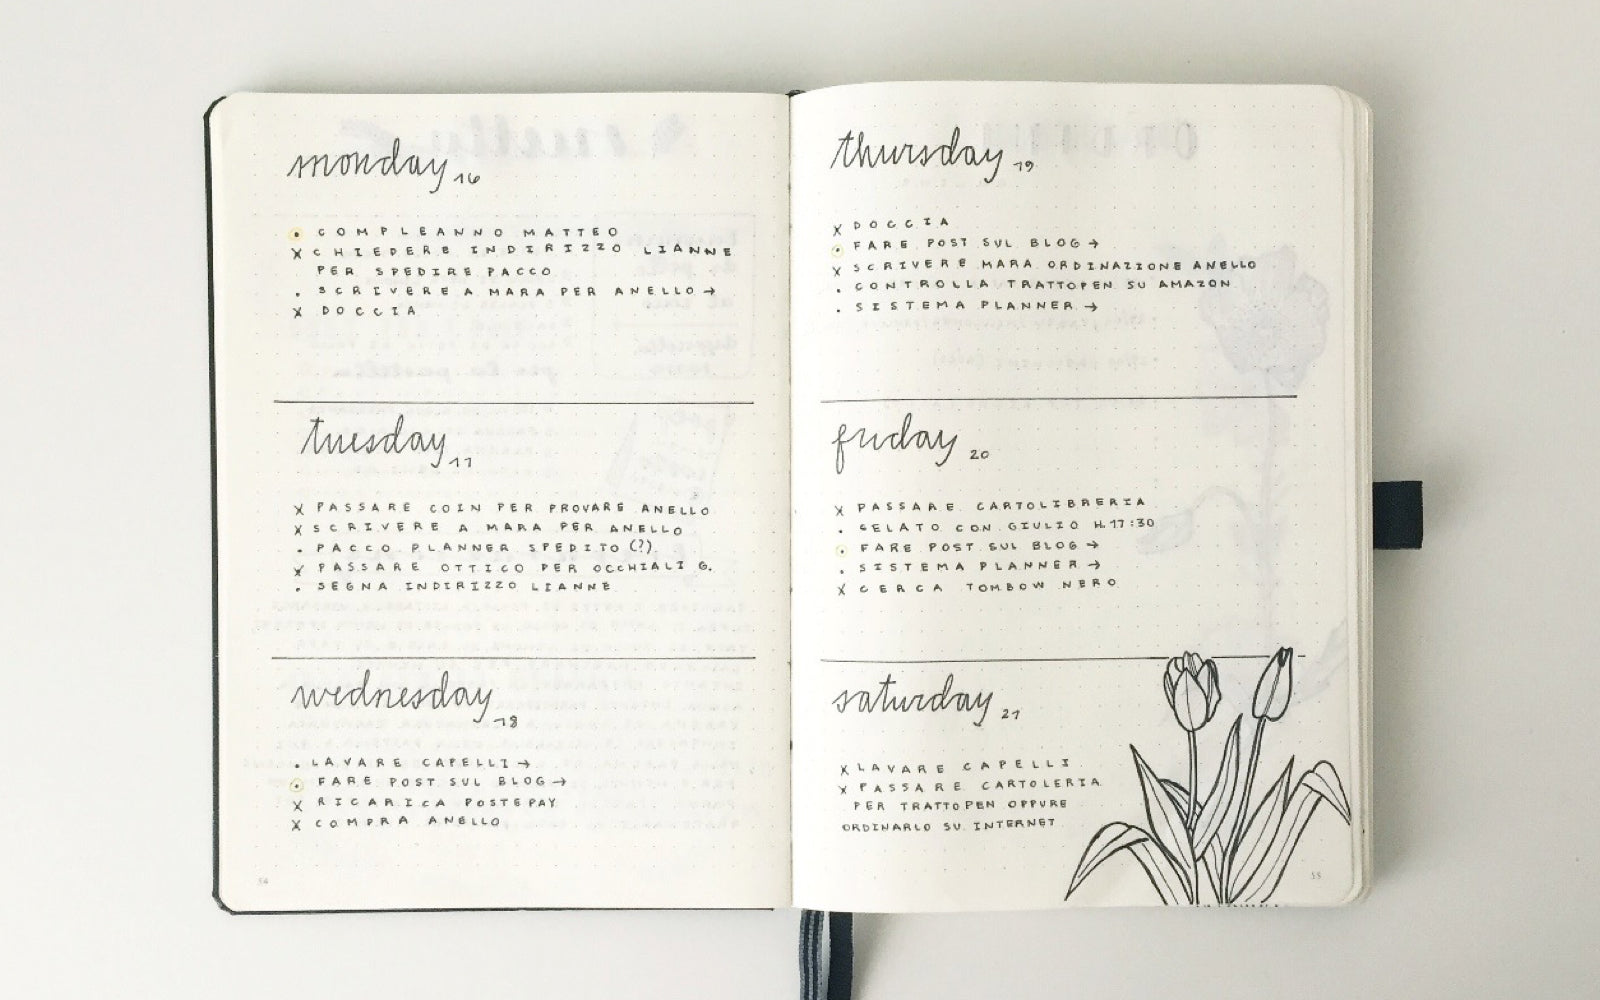 BuJo Show and Tell With @feebujo - Bullet Journal